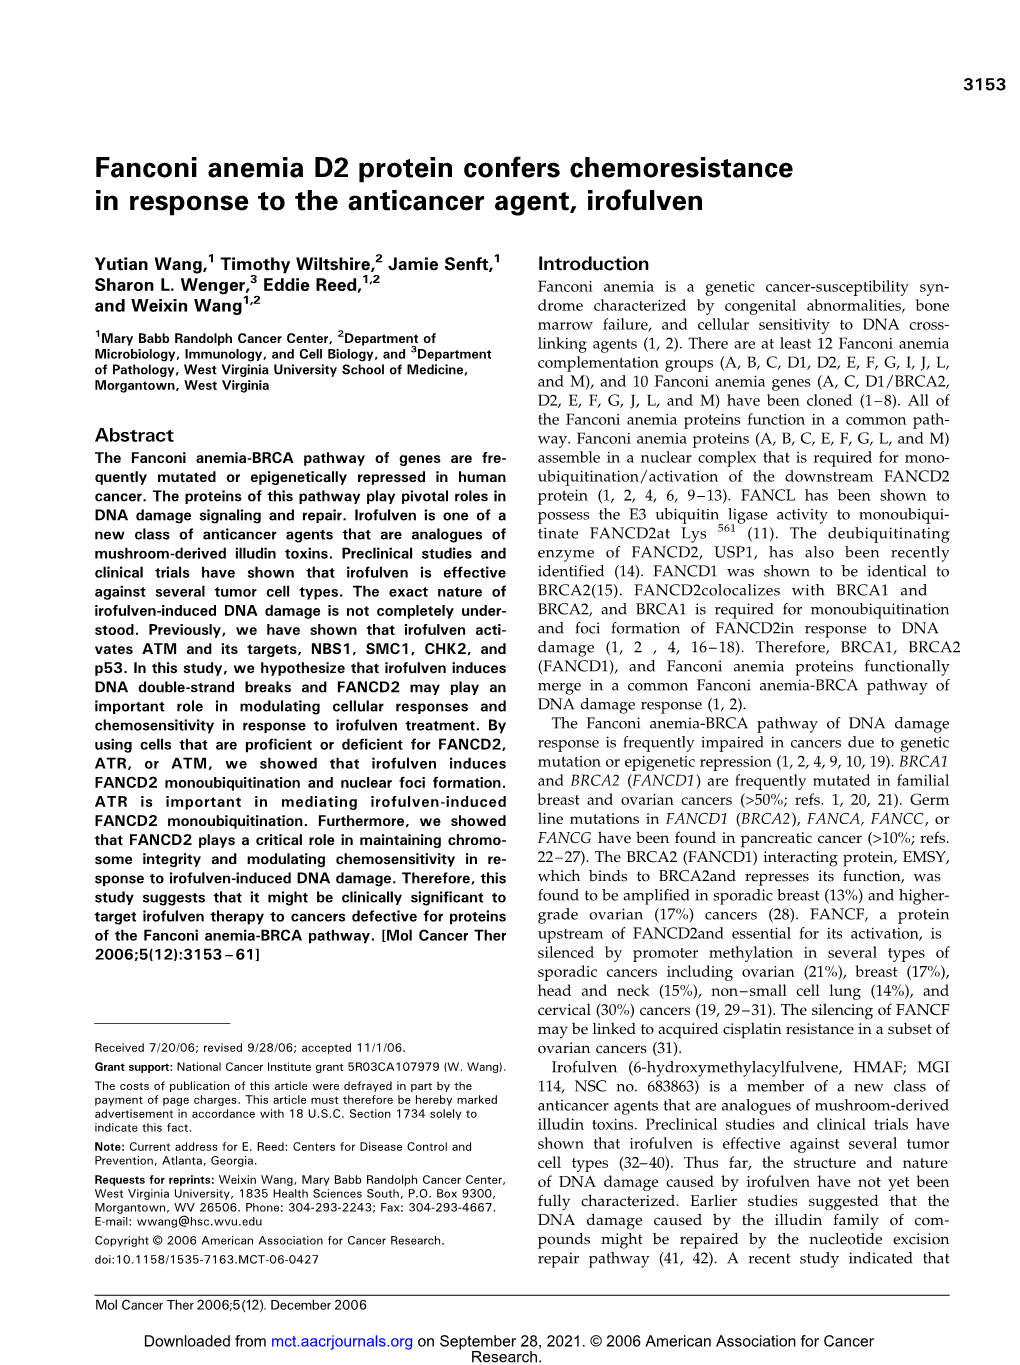 Fanconi Anemia D2 Protein Confers Chemoresistance in Response to the Anticancer Agent, Irofulven